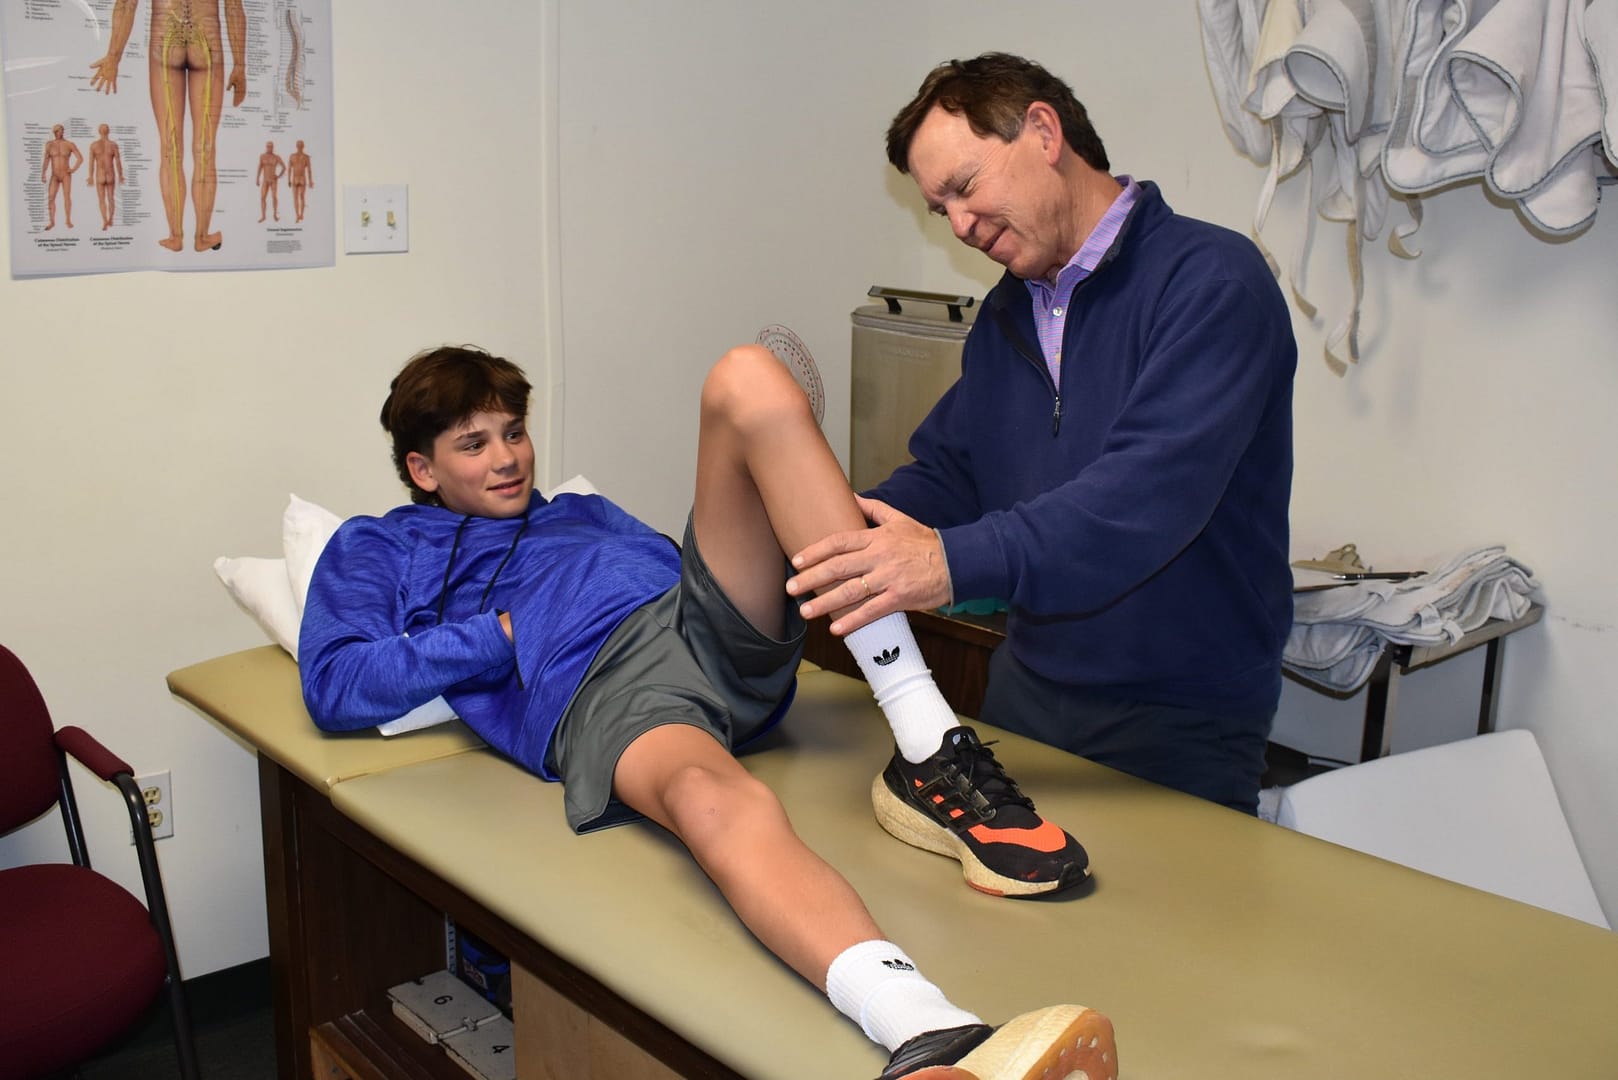 client undergoing evaluation after sports injury